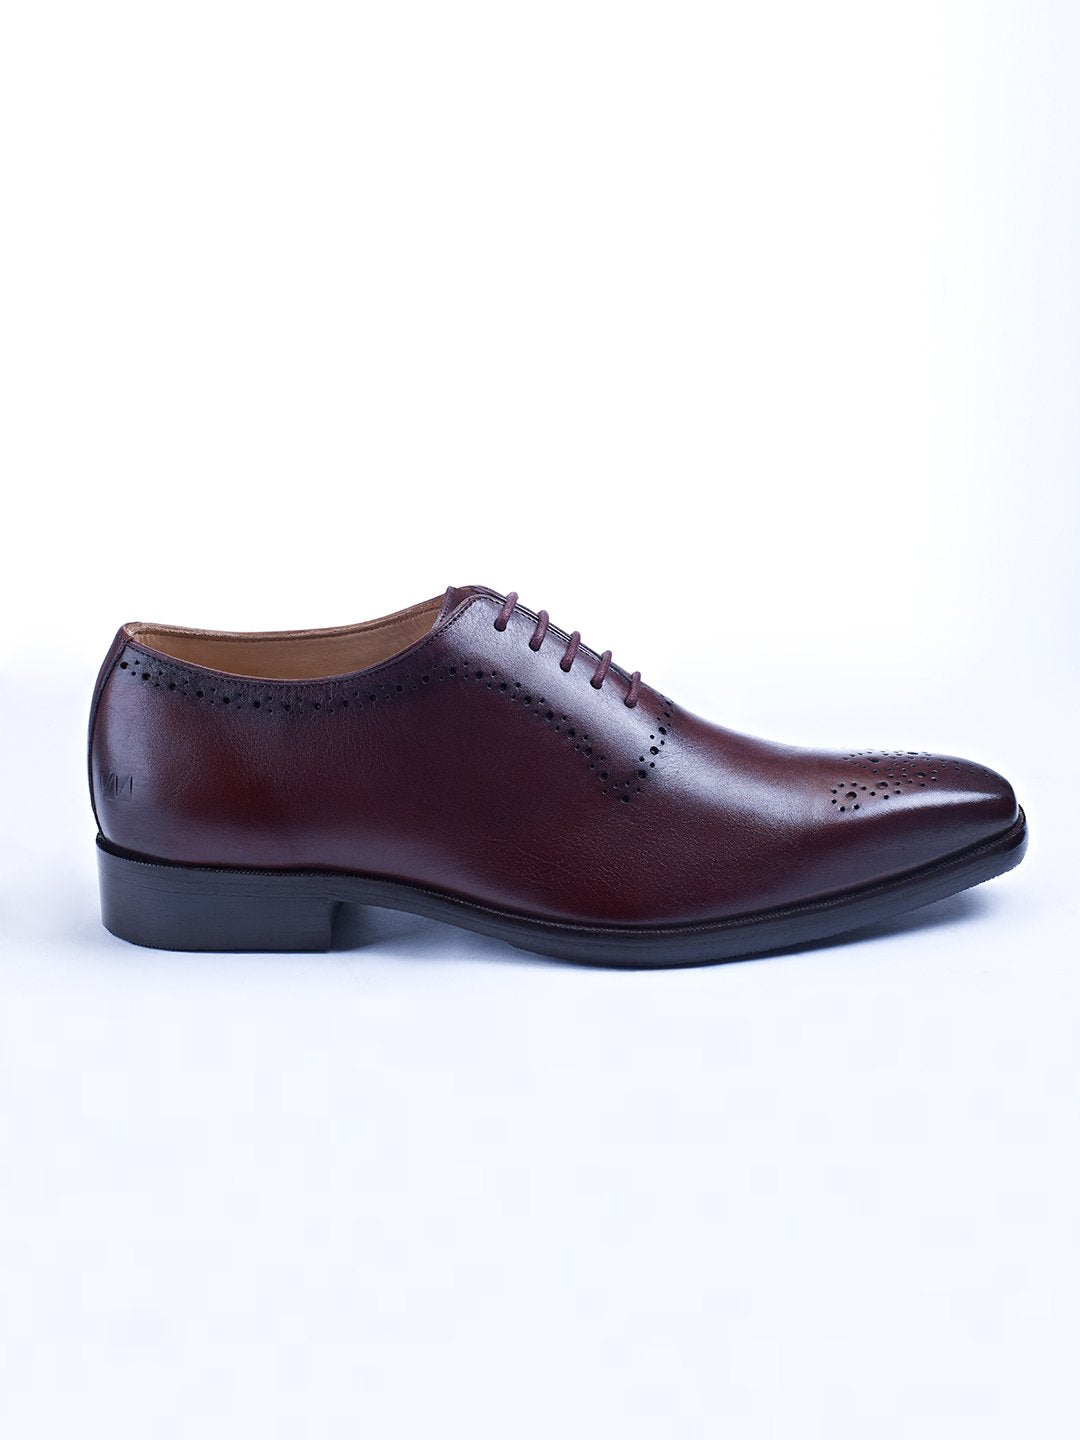 Oxford Lace Up Shoes With Broguing (Brown) - Zest Mélange 